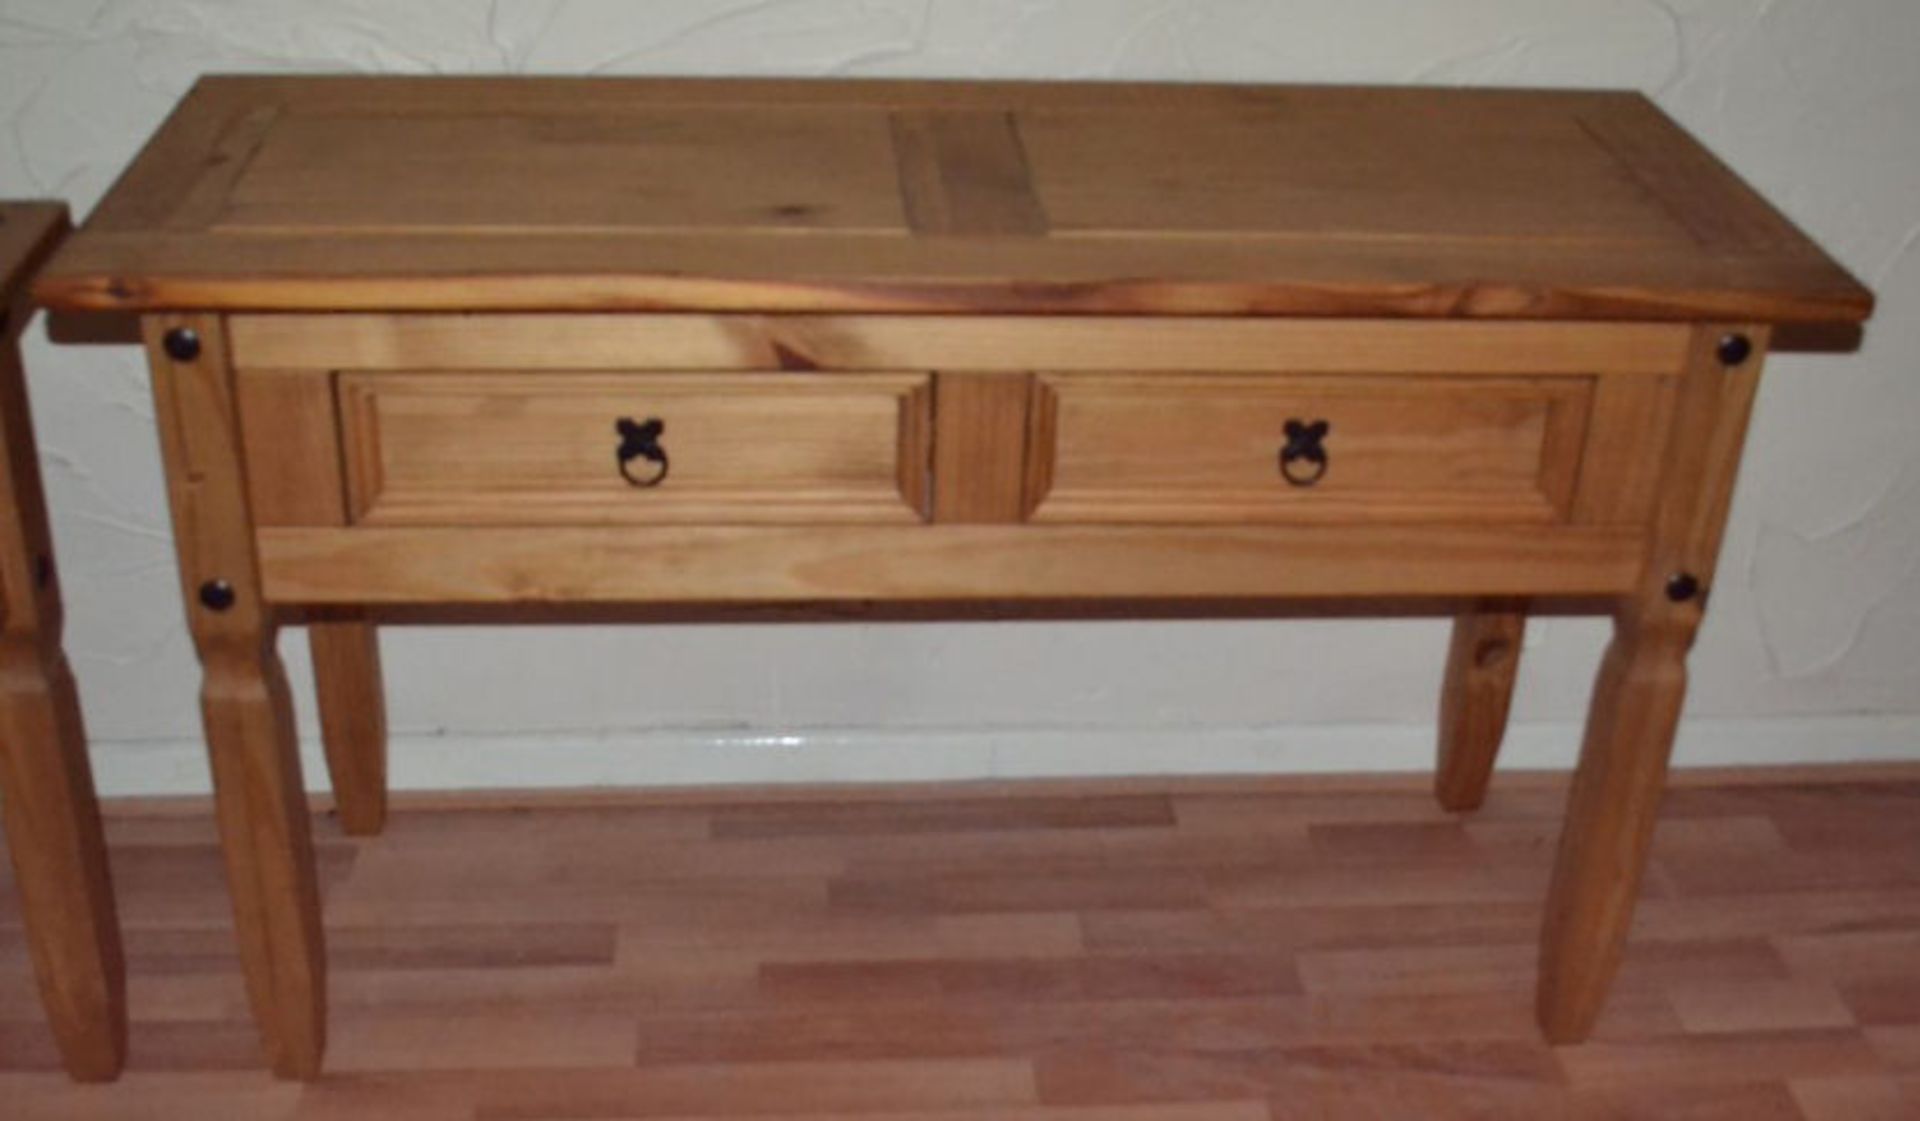 1 x Corona Mexican Pine Console Table - Image 2 of 3